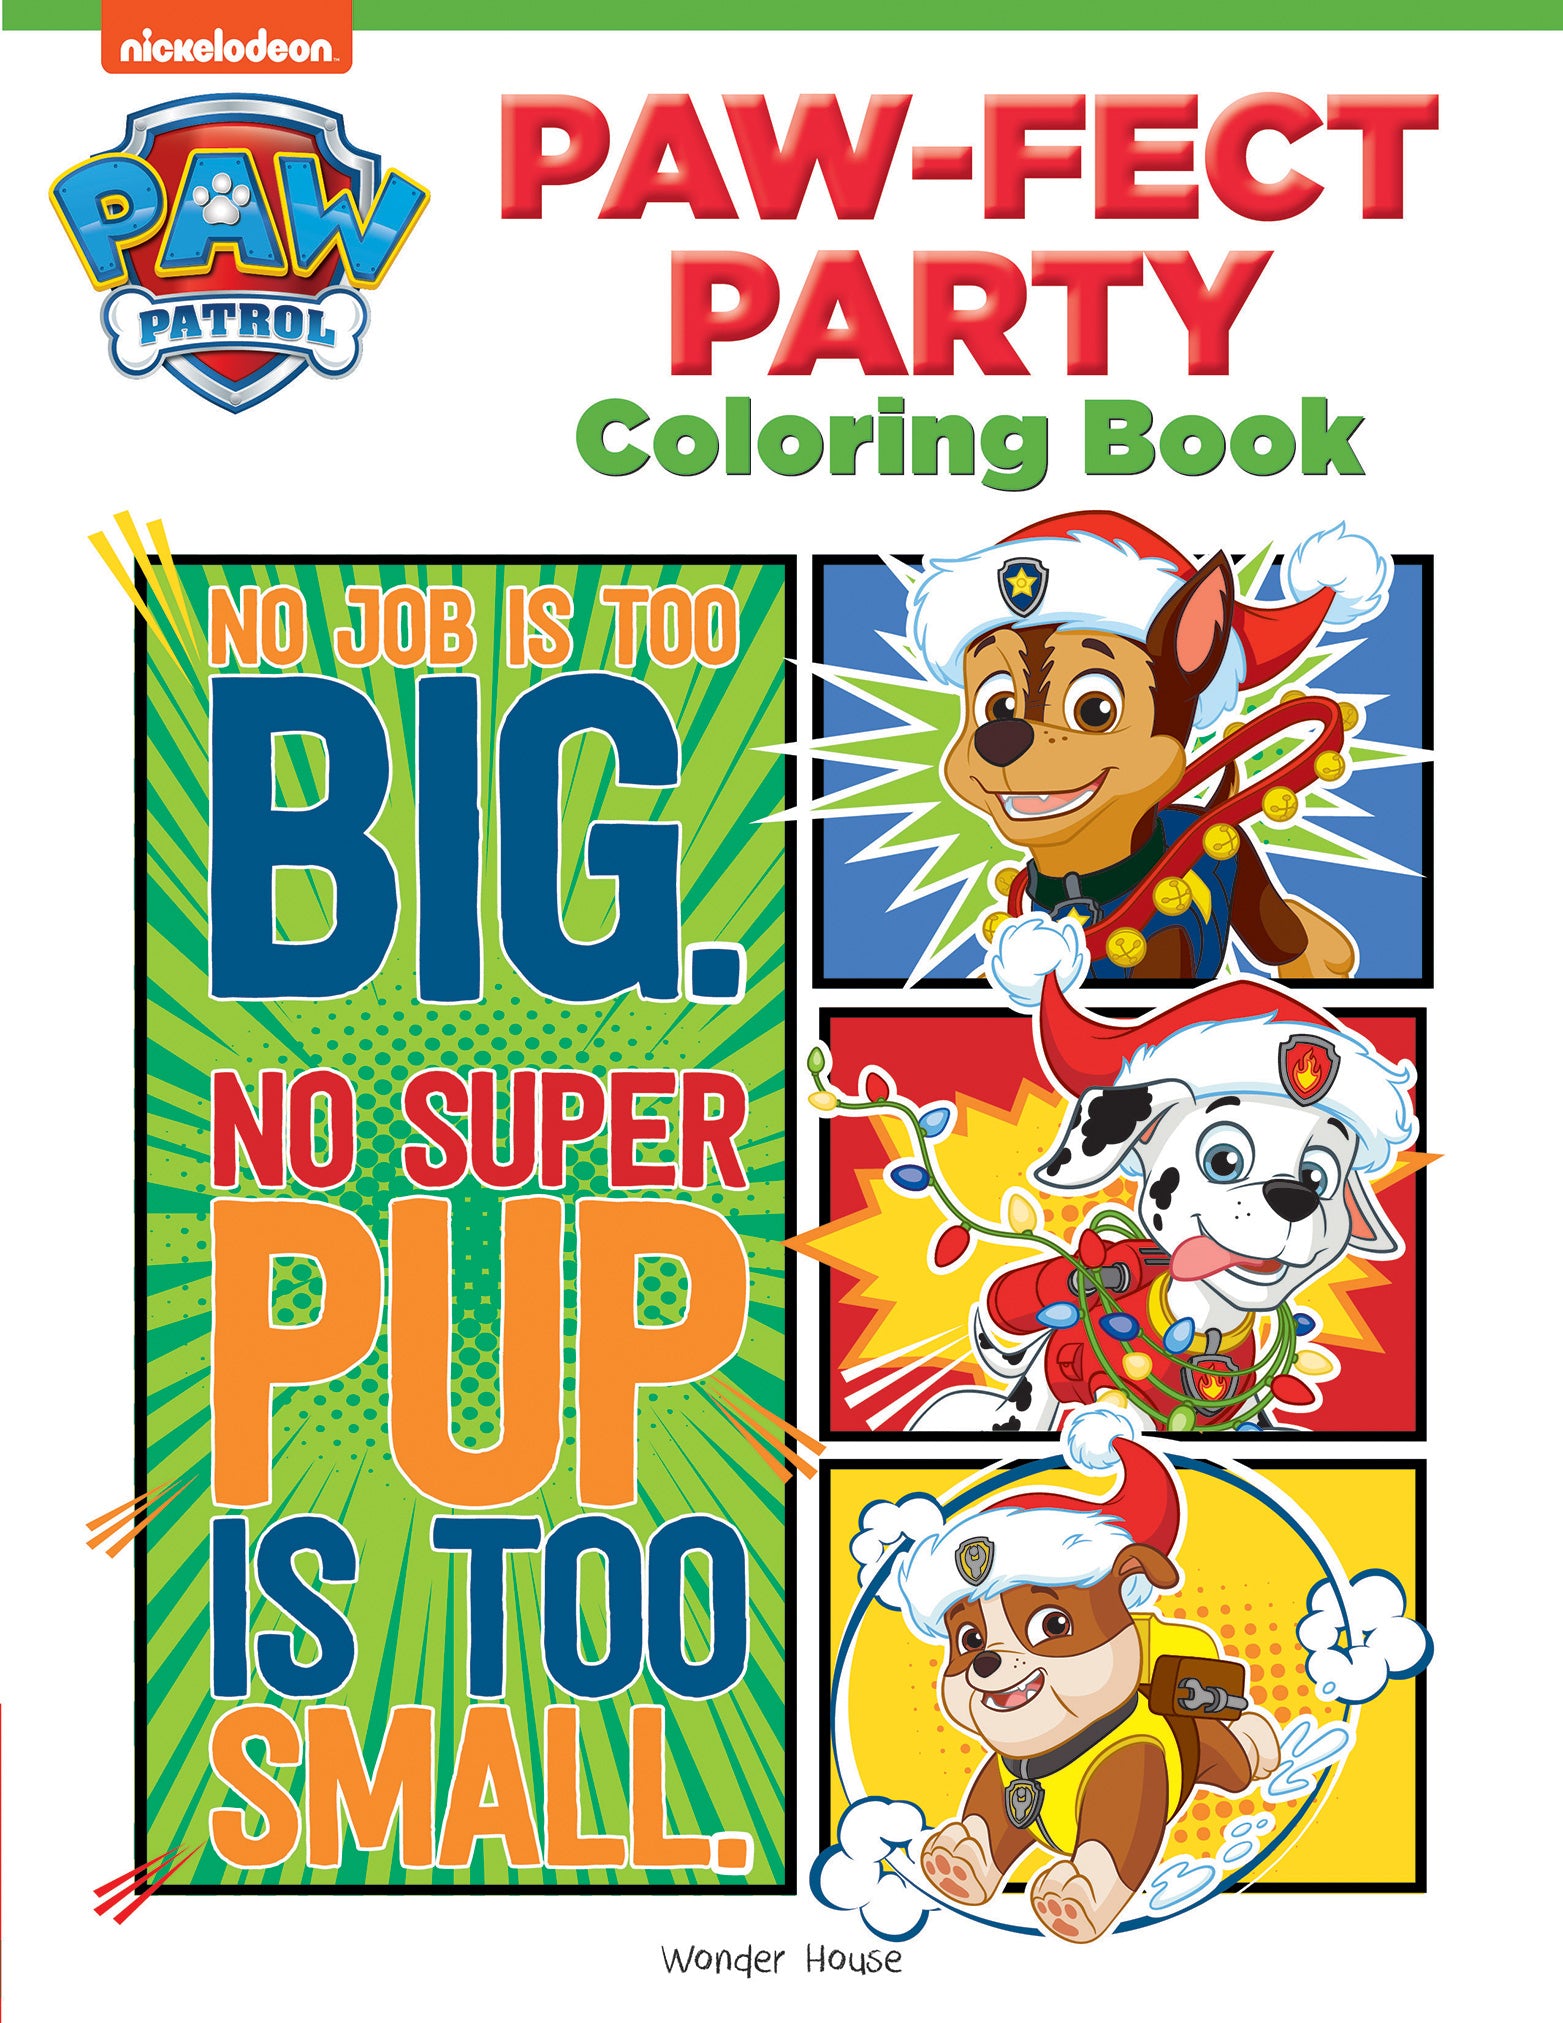 Paw-fect Party: Paw Patrol Coloring Book For Kids